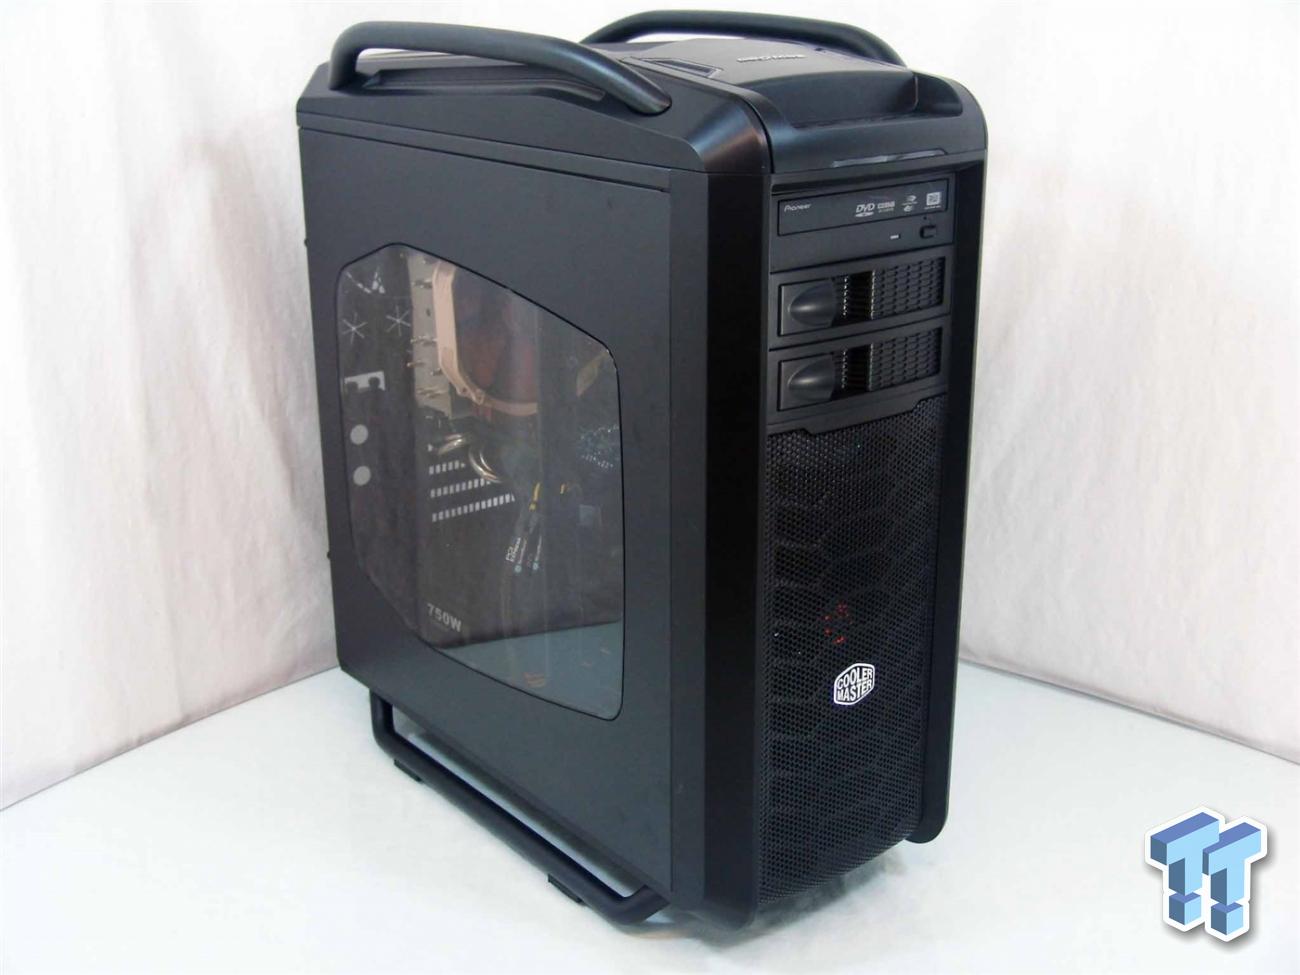 Cooler Master Cosmos Se Full Tower Chassis Review Tweaktown